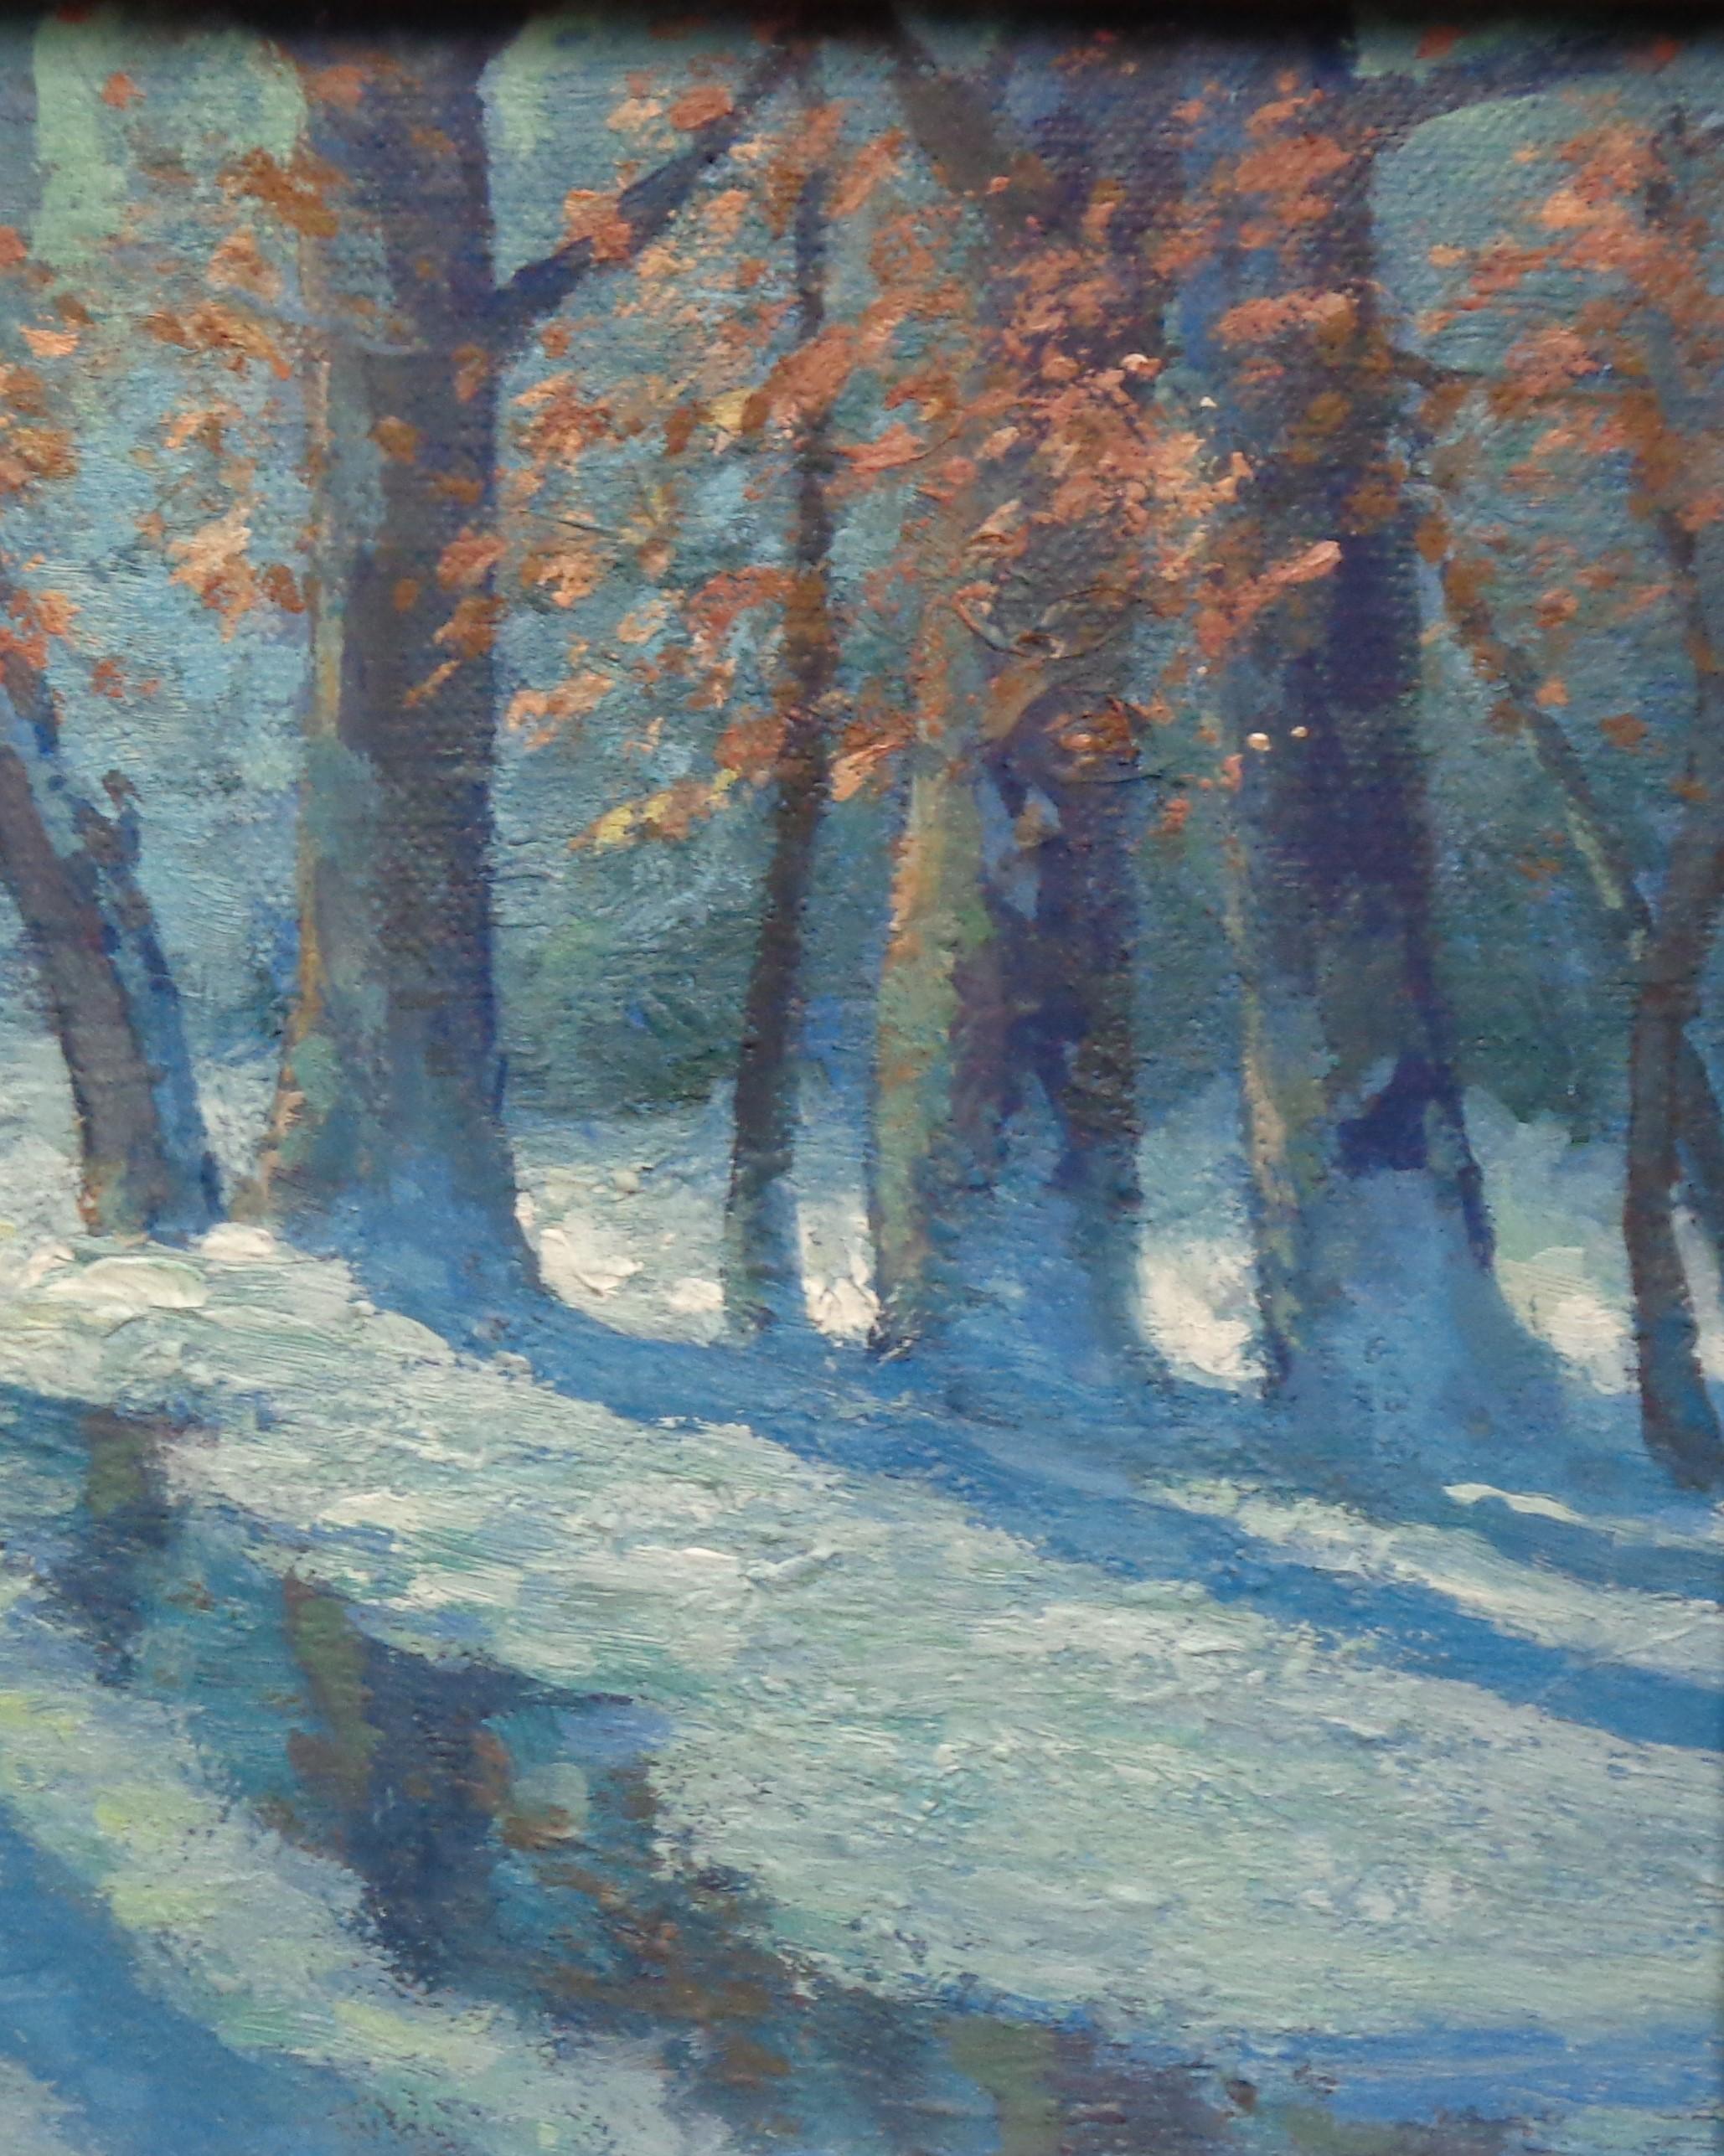  Impressionistic Winter Snow Landscape Oil Painting Michael Budden Winter Woods For Sale 3